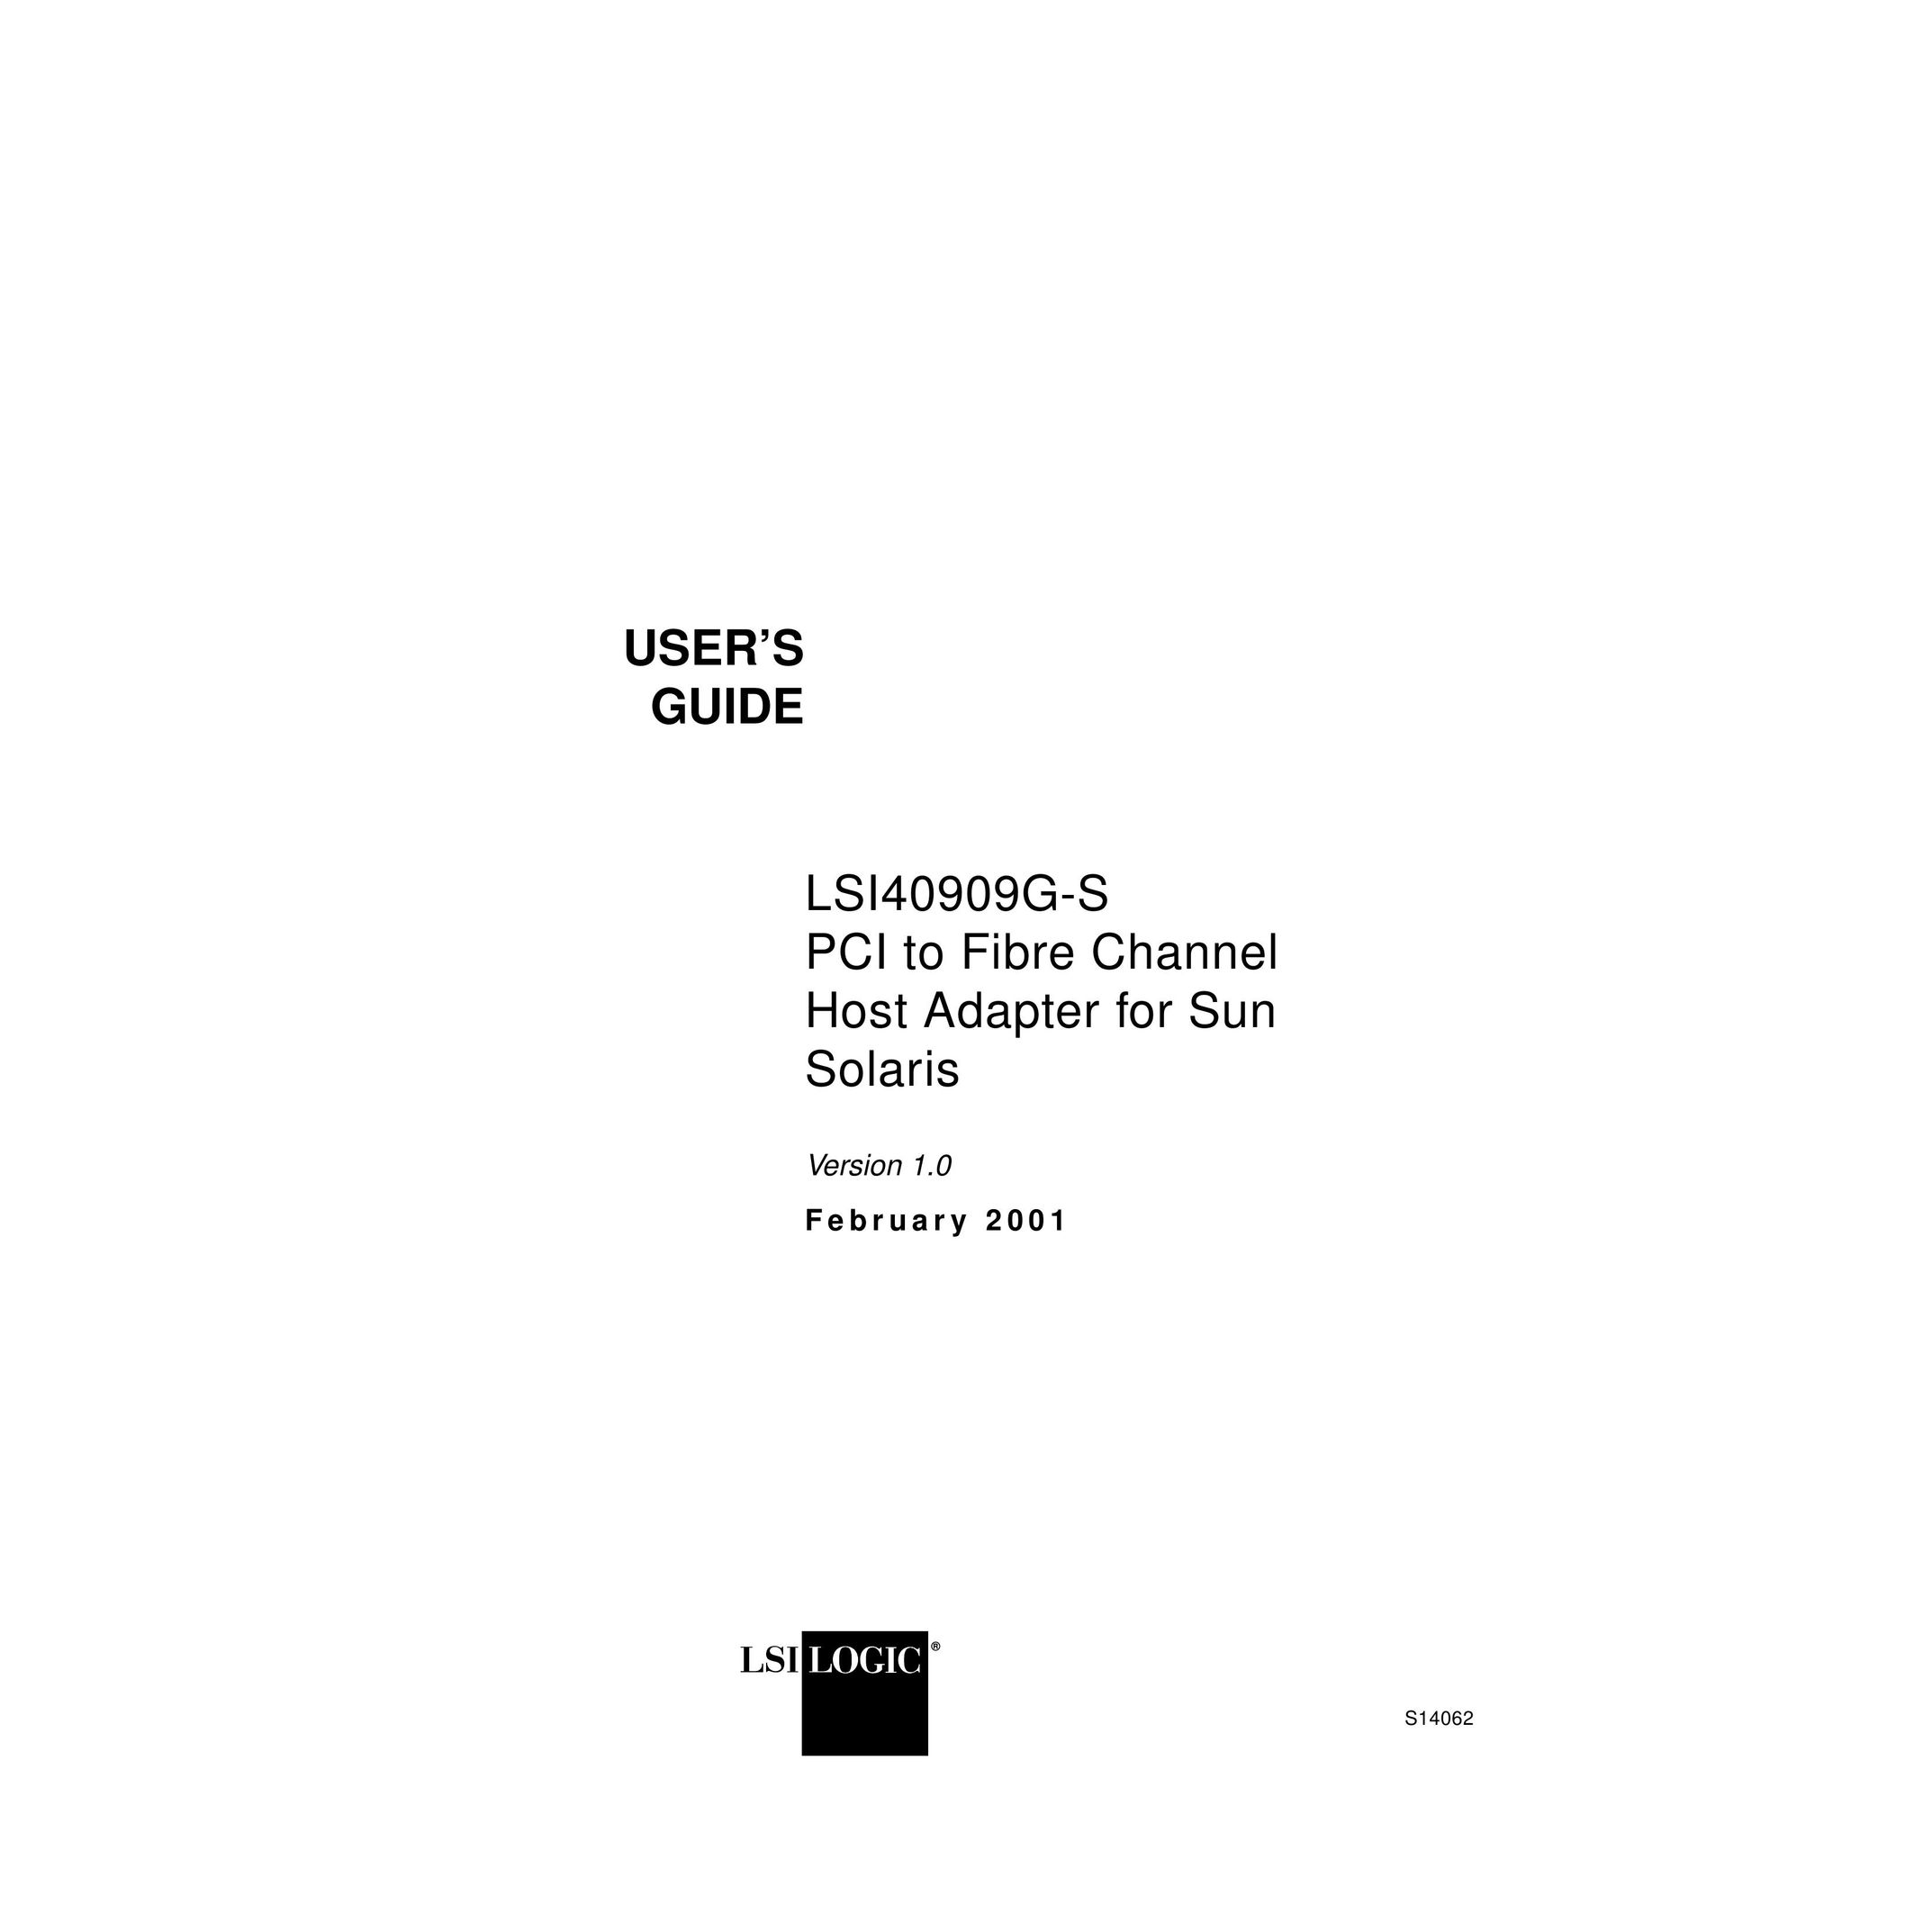 LSI 40909G-S Network Card User Manual